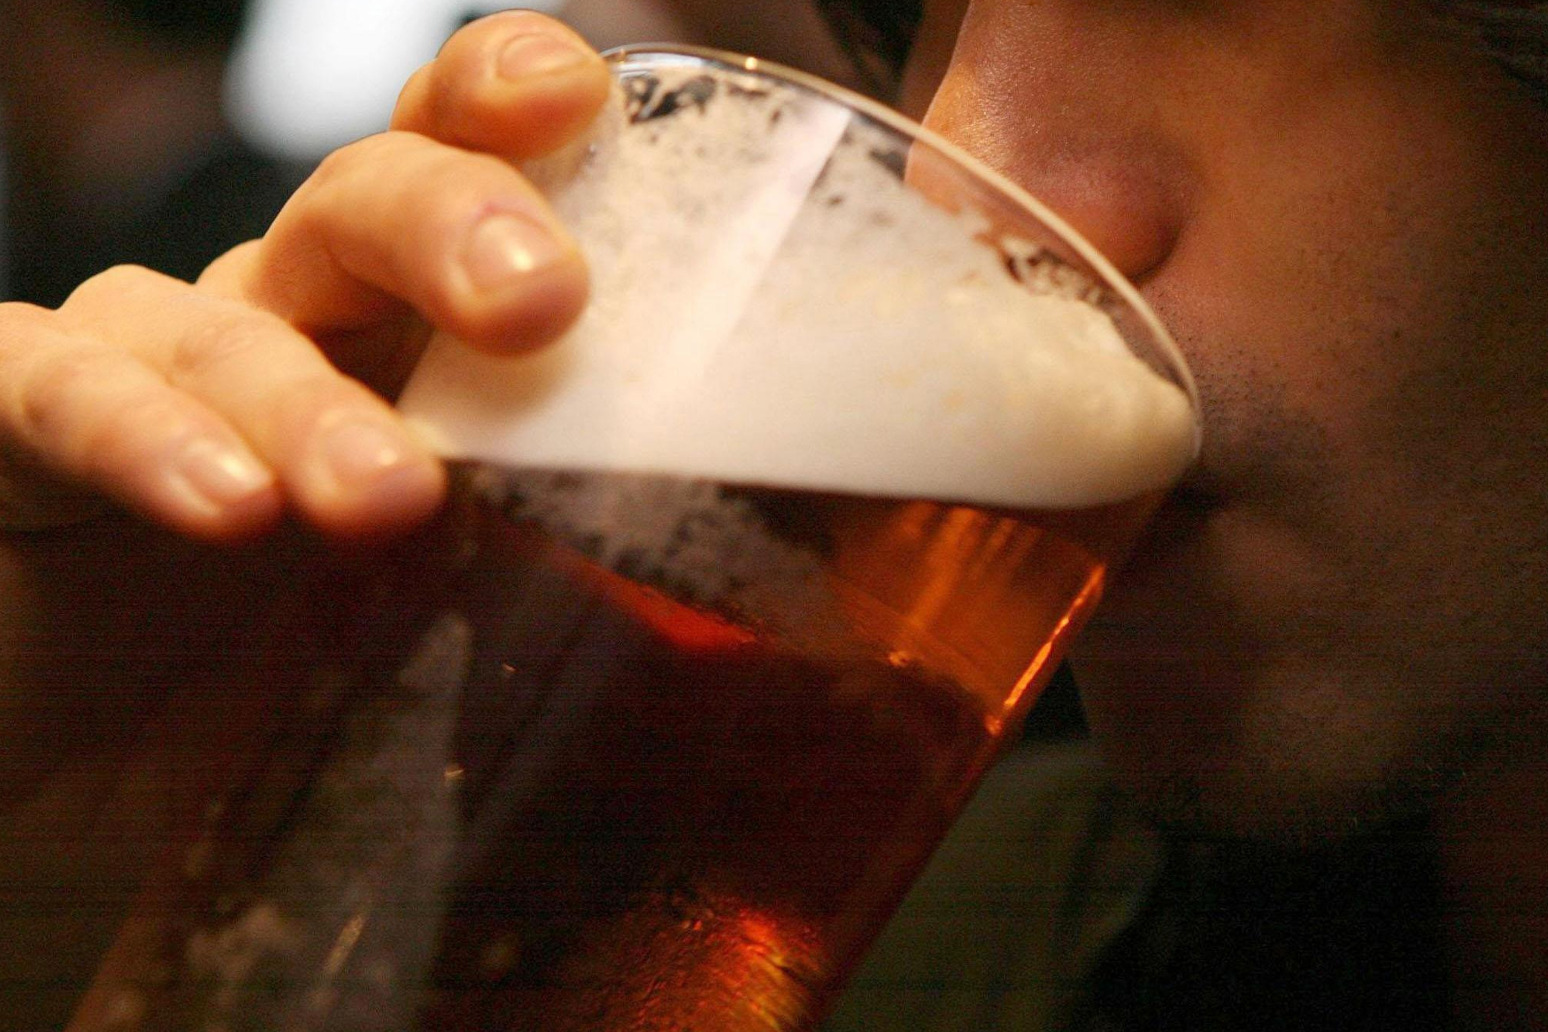 Drinking within NHS guidelines ‘can increase risk of heart disease’ 